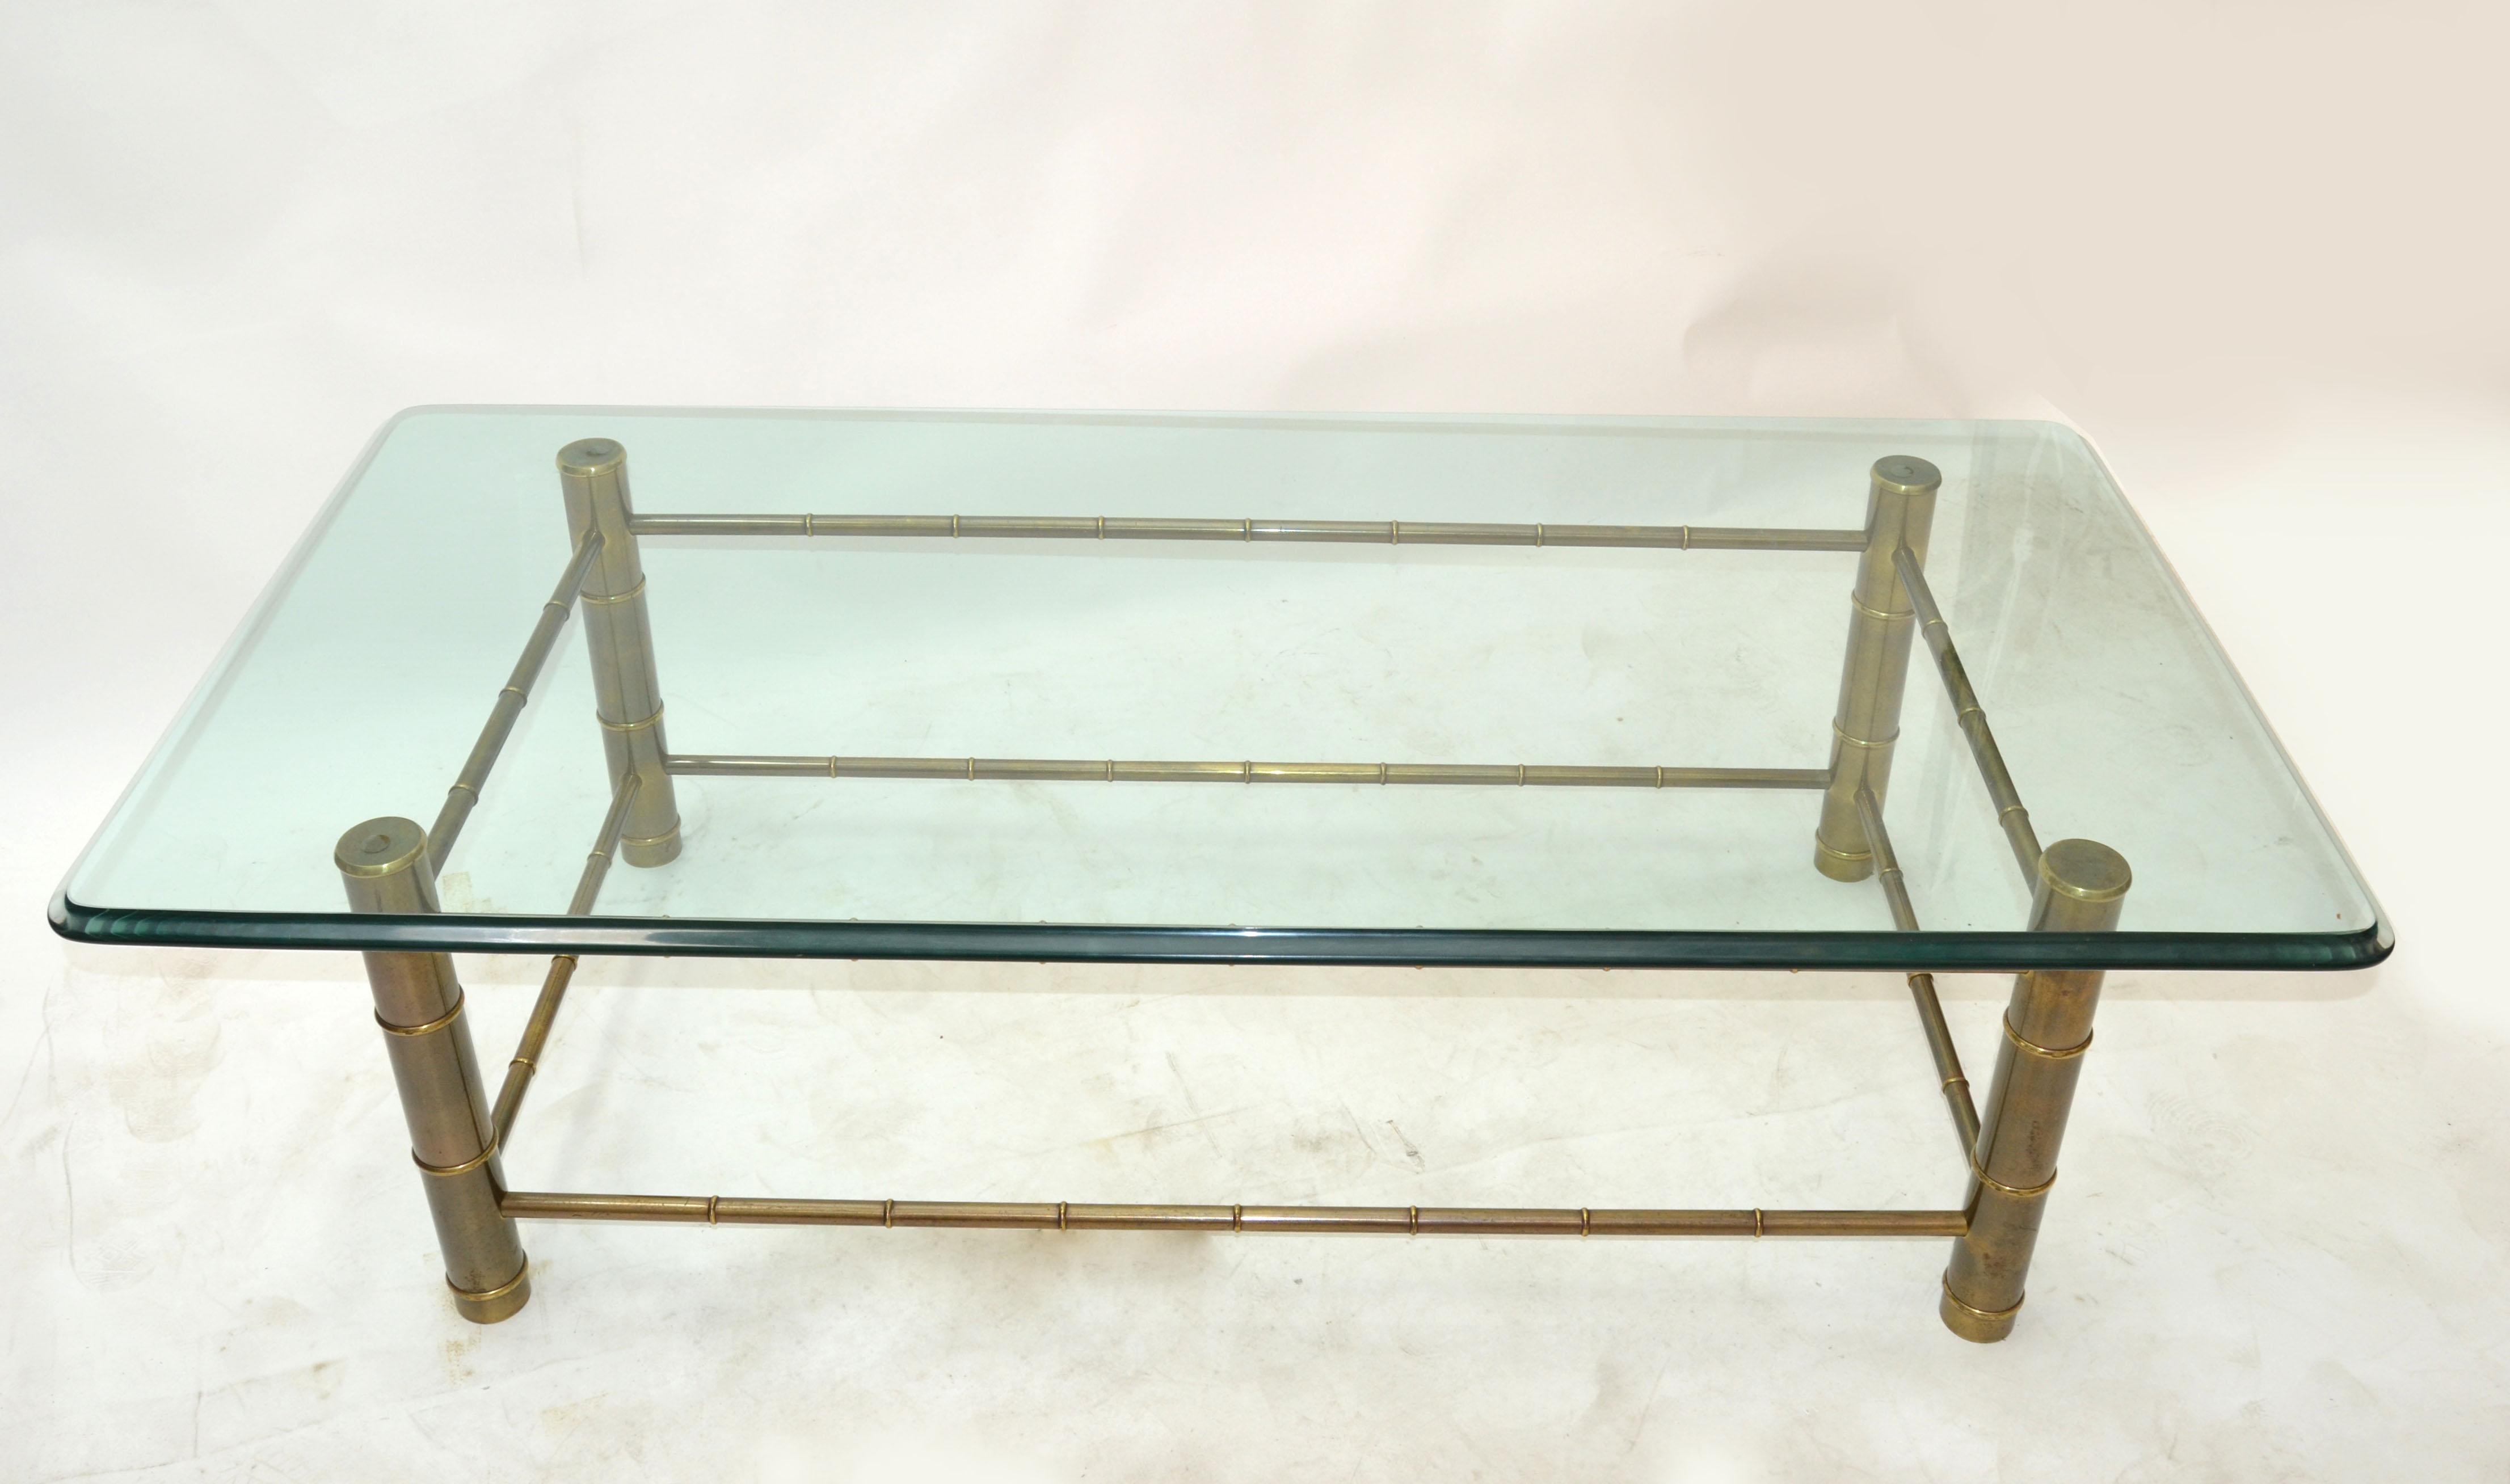 Incredible Mastercraft faux bamboo brass rectangular coffee table with heavy beveled and green tinted glass top.
Mid-Century Modern patinated brass faux bamboo with the original glass top.
Made in USA.
Base measures: 47.5 x 24.5 x 17 inches